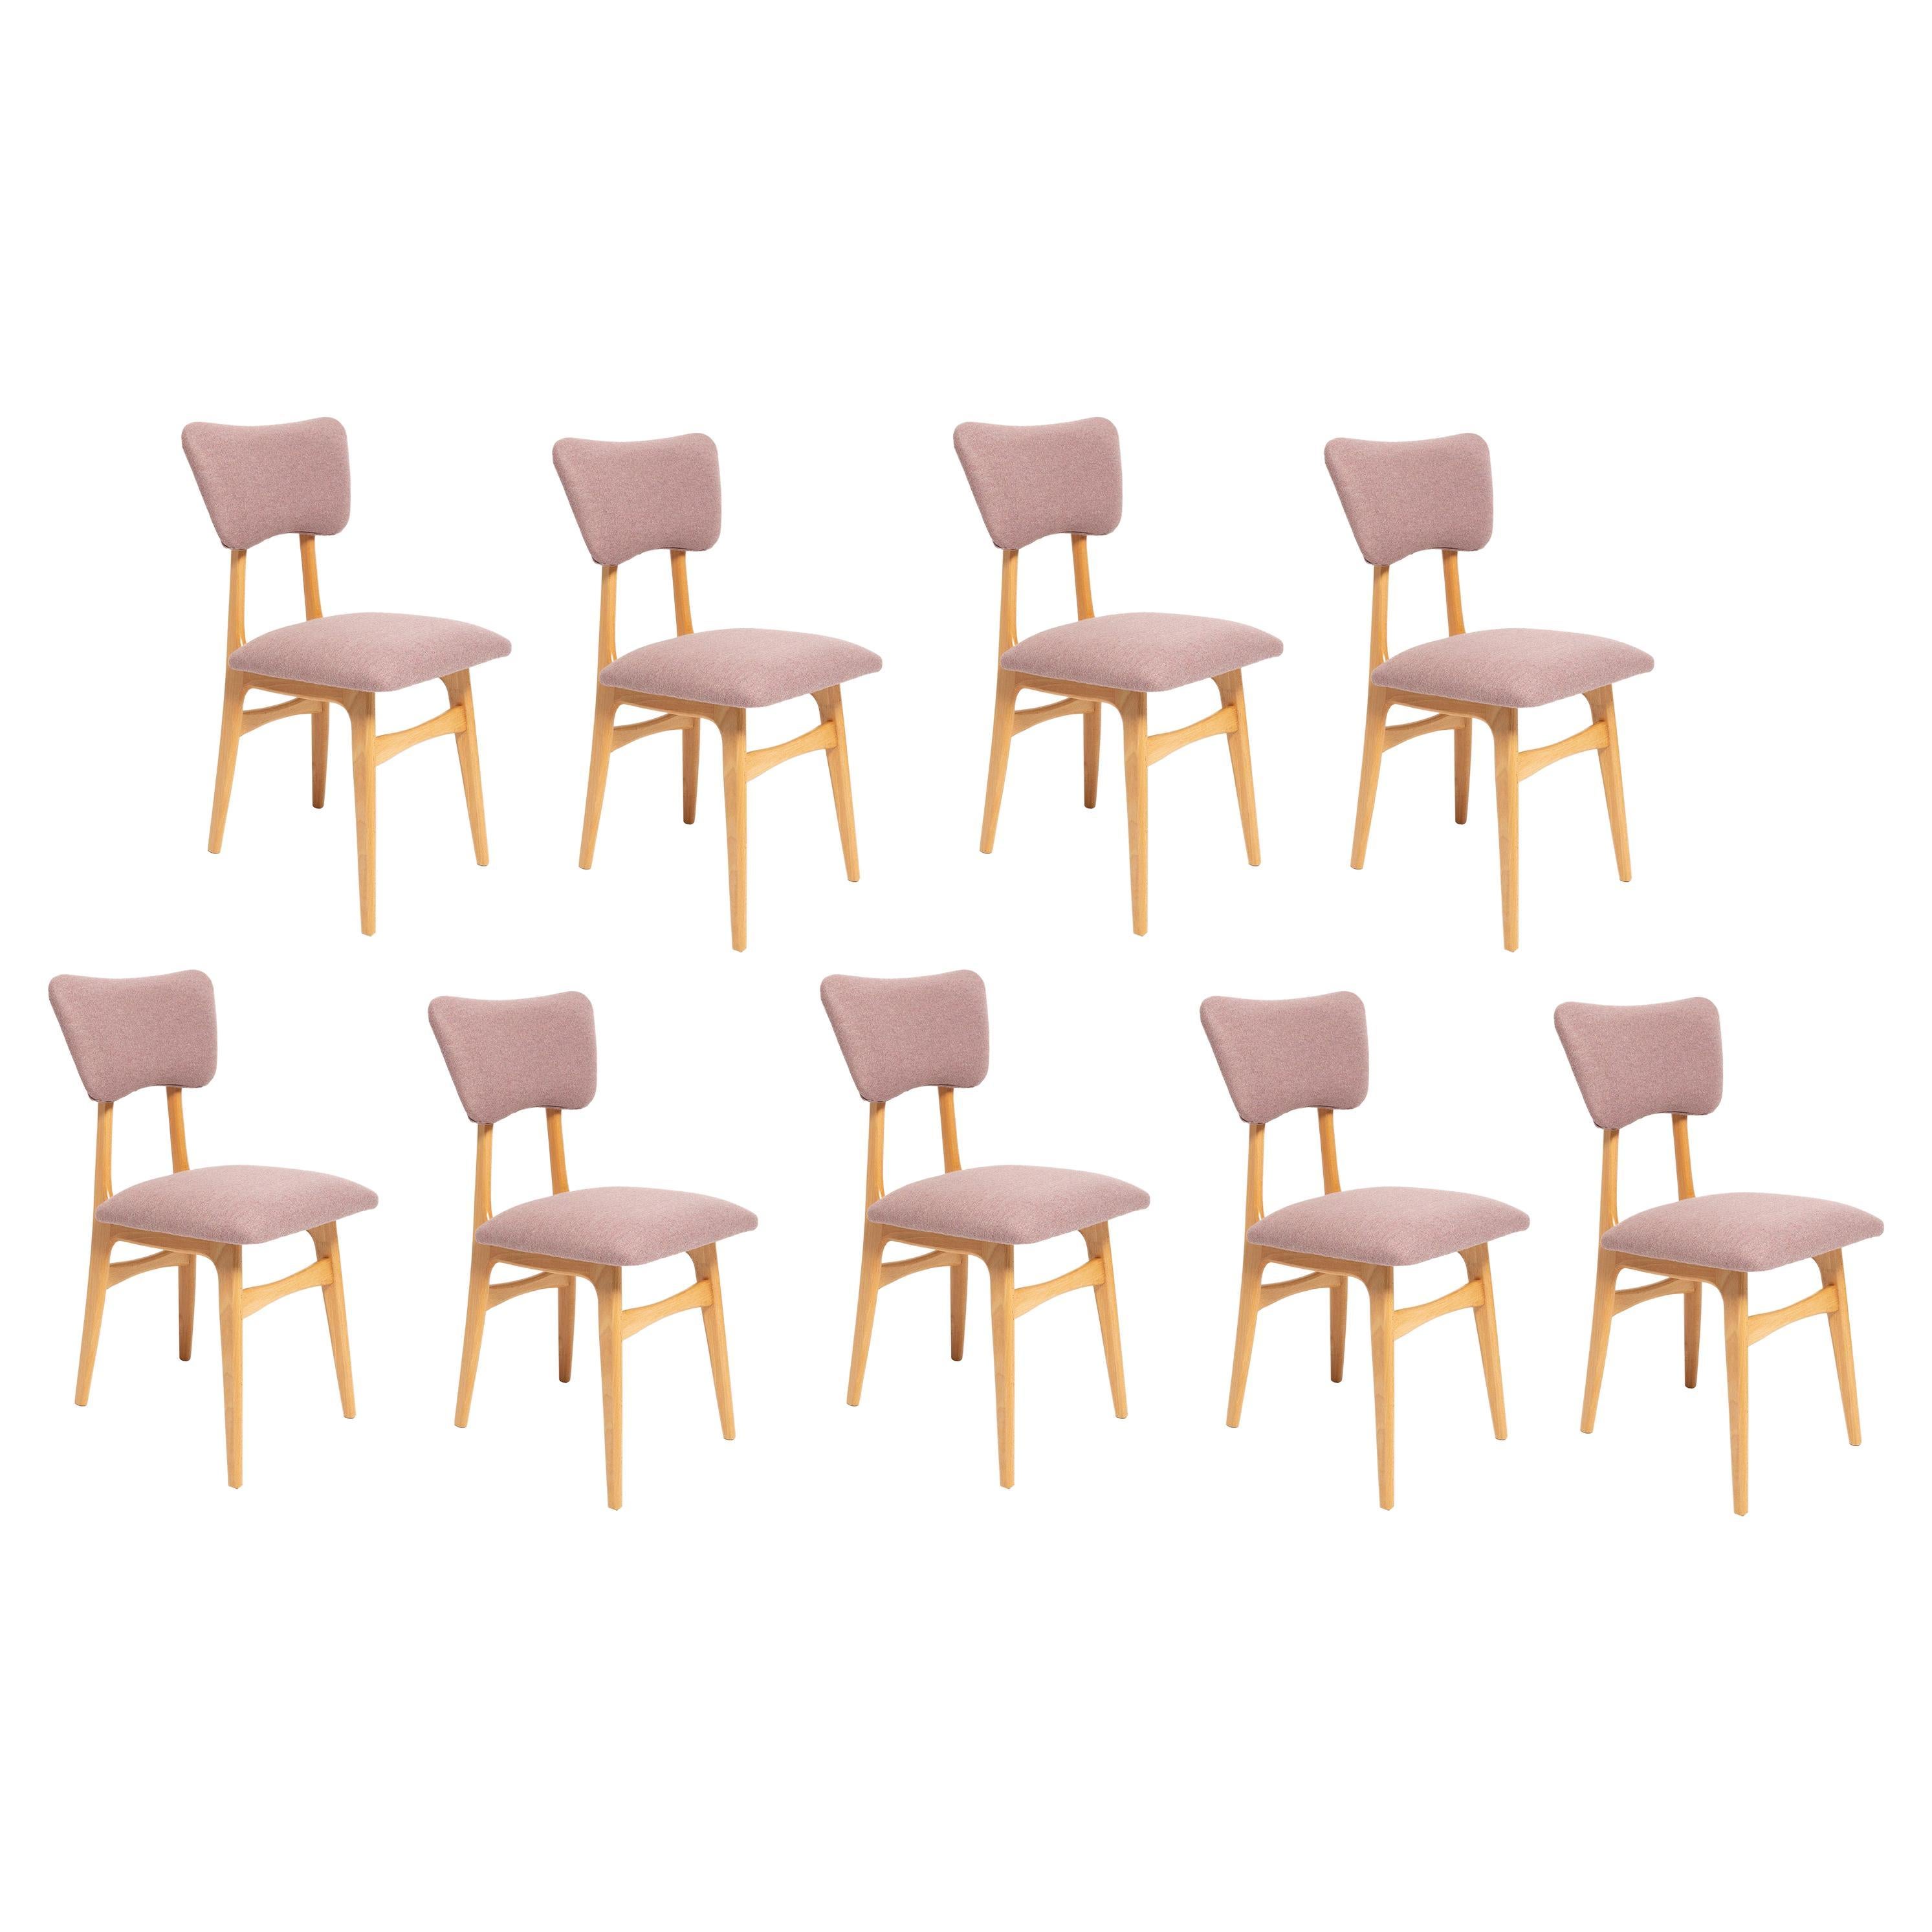 Nine 20th Century Butterfly Dining Chairs, Pink Wool, Light Wood, Europe, 1960s For Sale